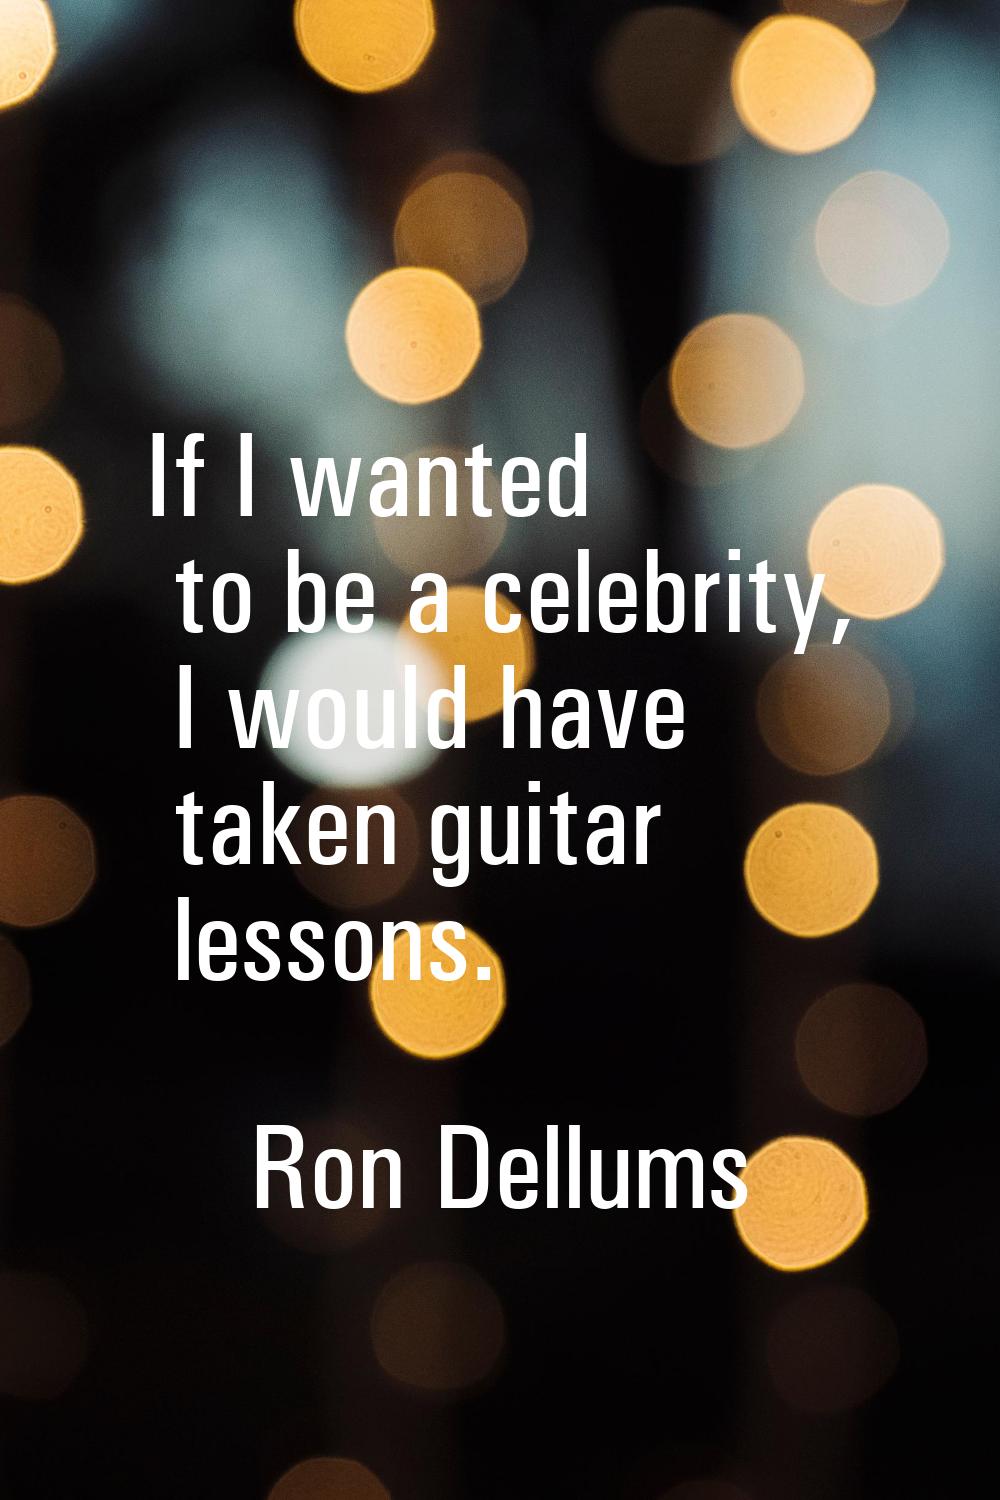 If I wanted to be a celebrity, I would have taken guitar lessons.